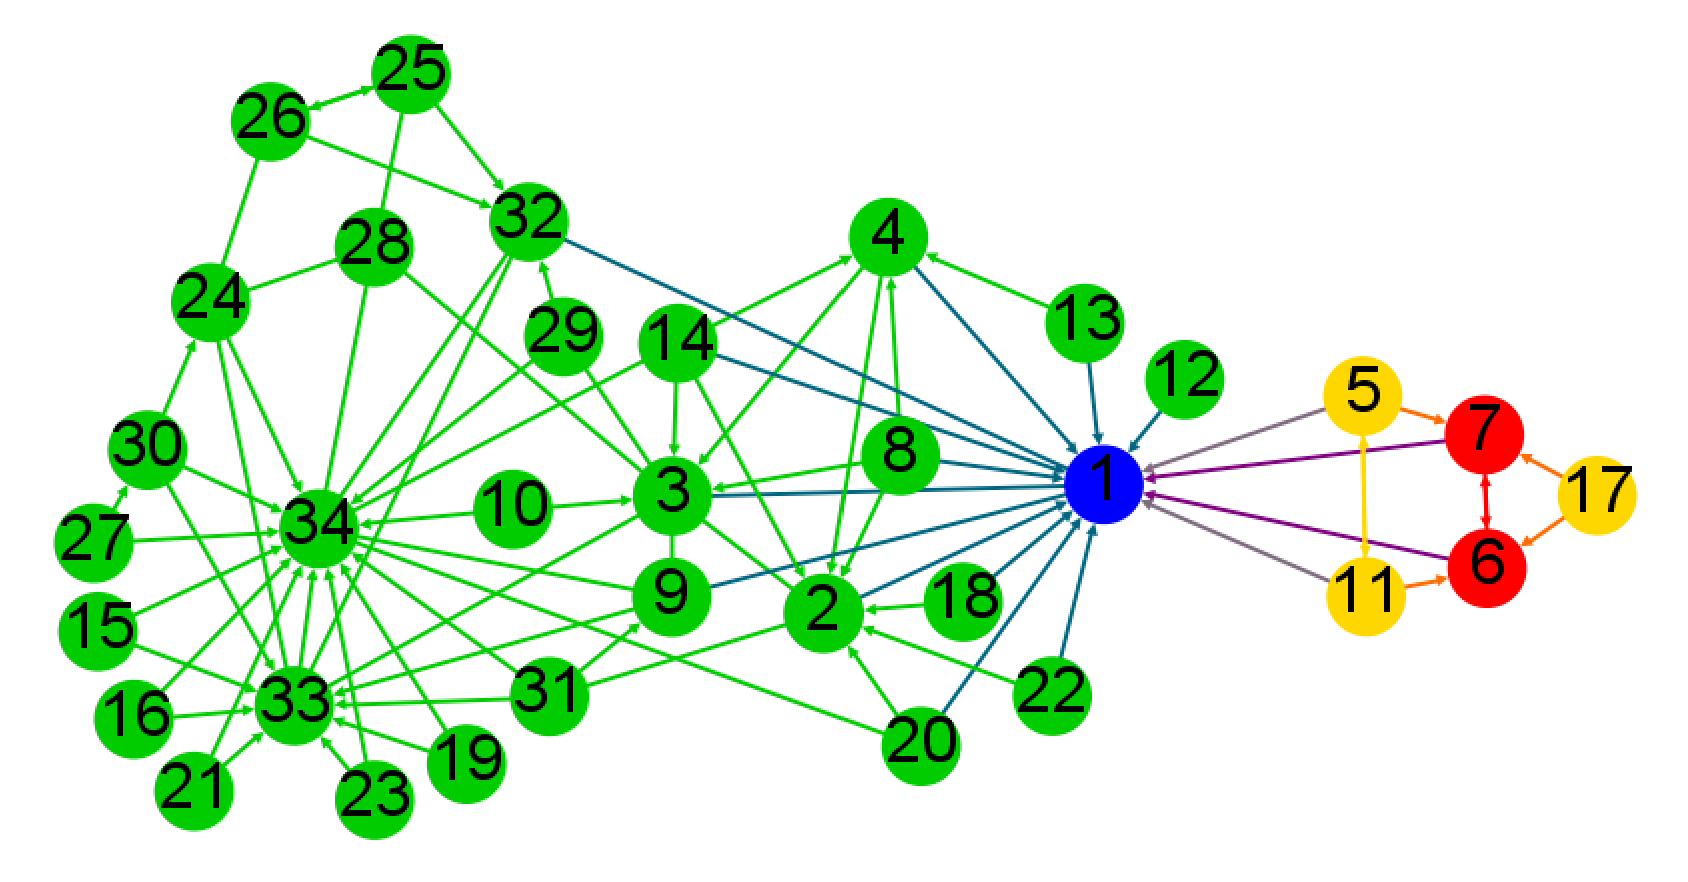 Zone generated by nodes 6 or 7